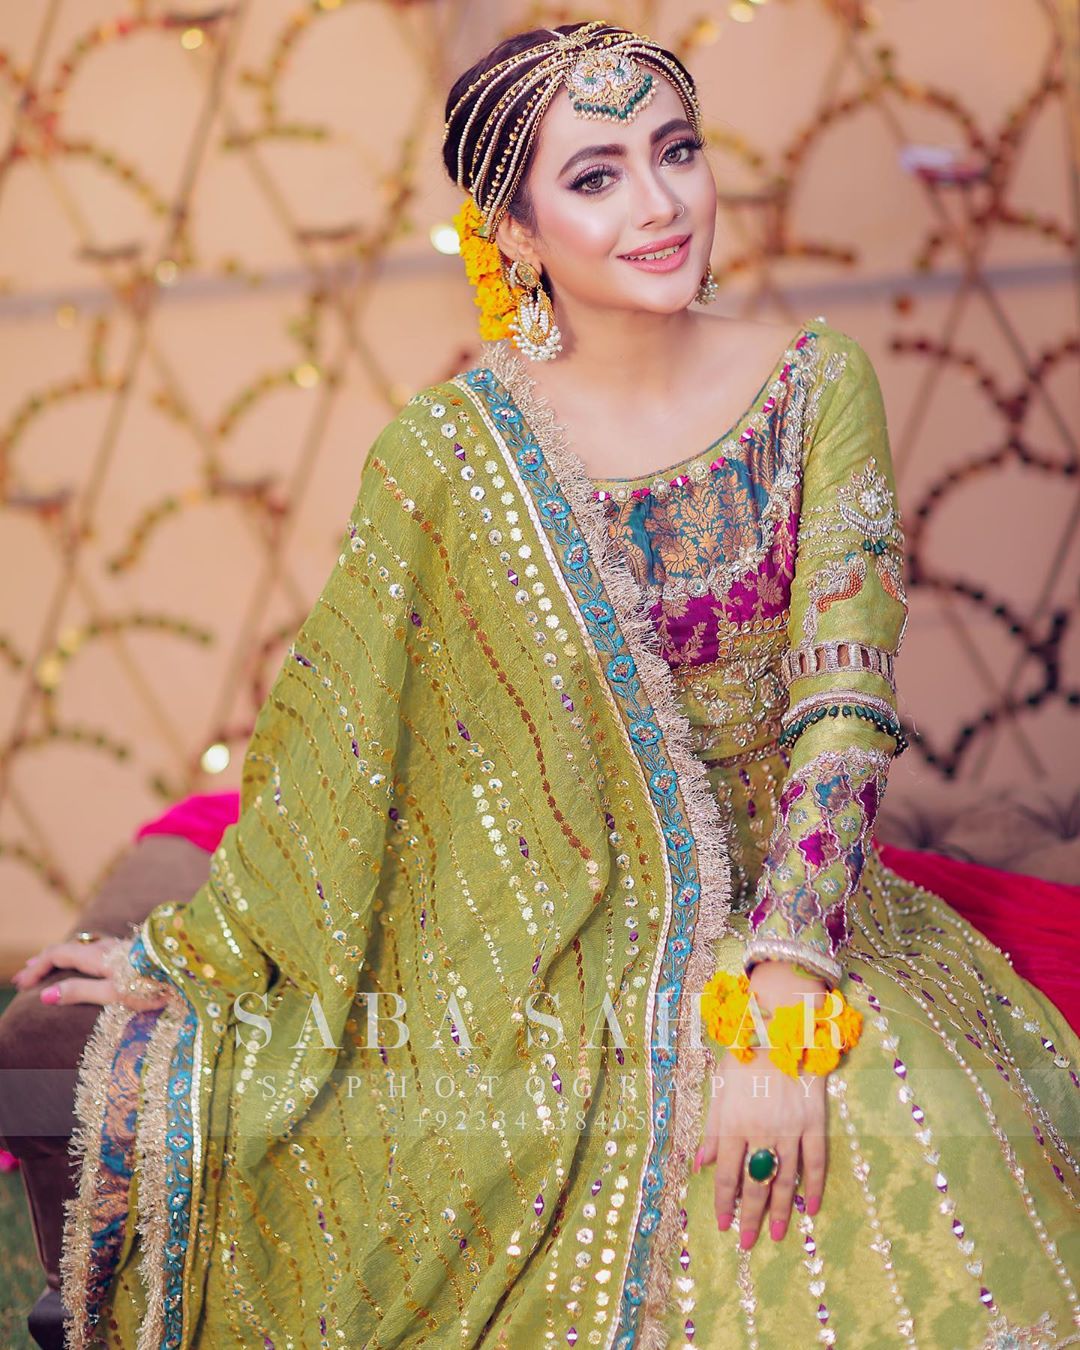 Suzain Fatima is Looking Gorgeous in her Latest Photo Shoot